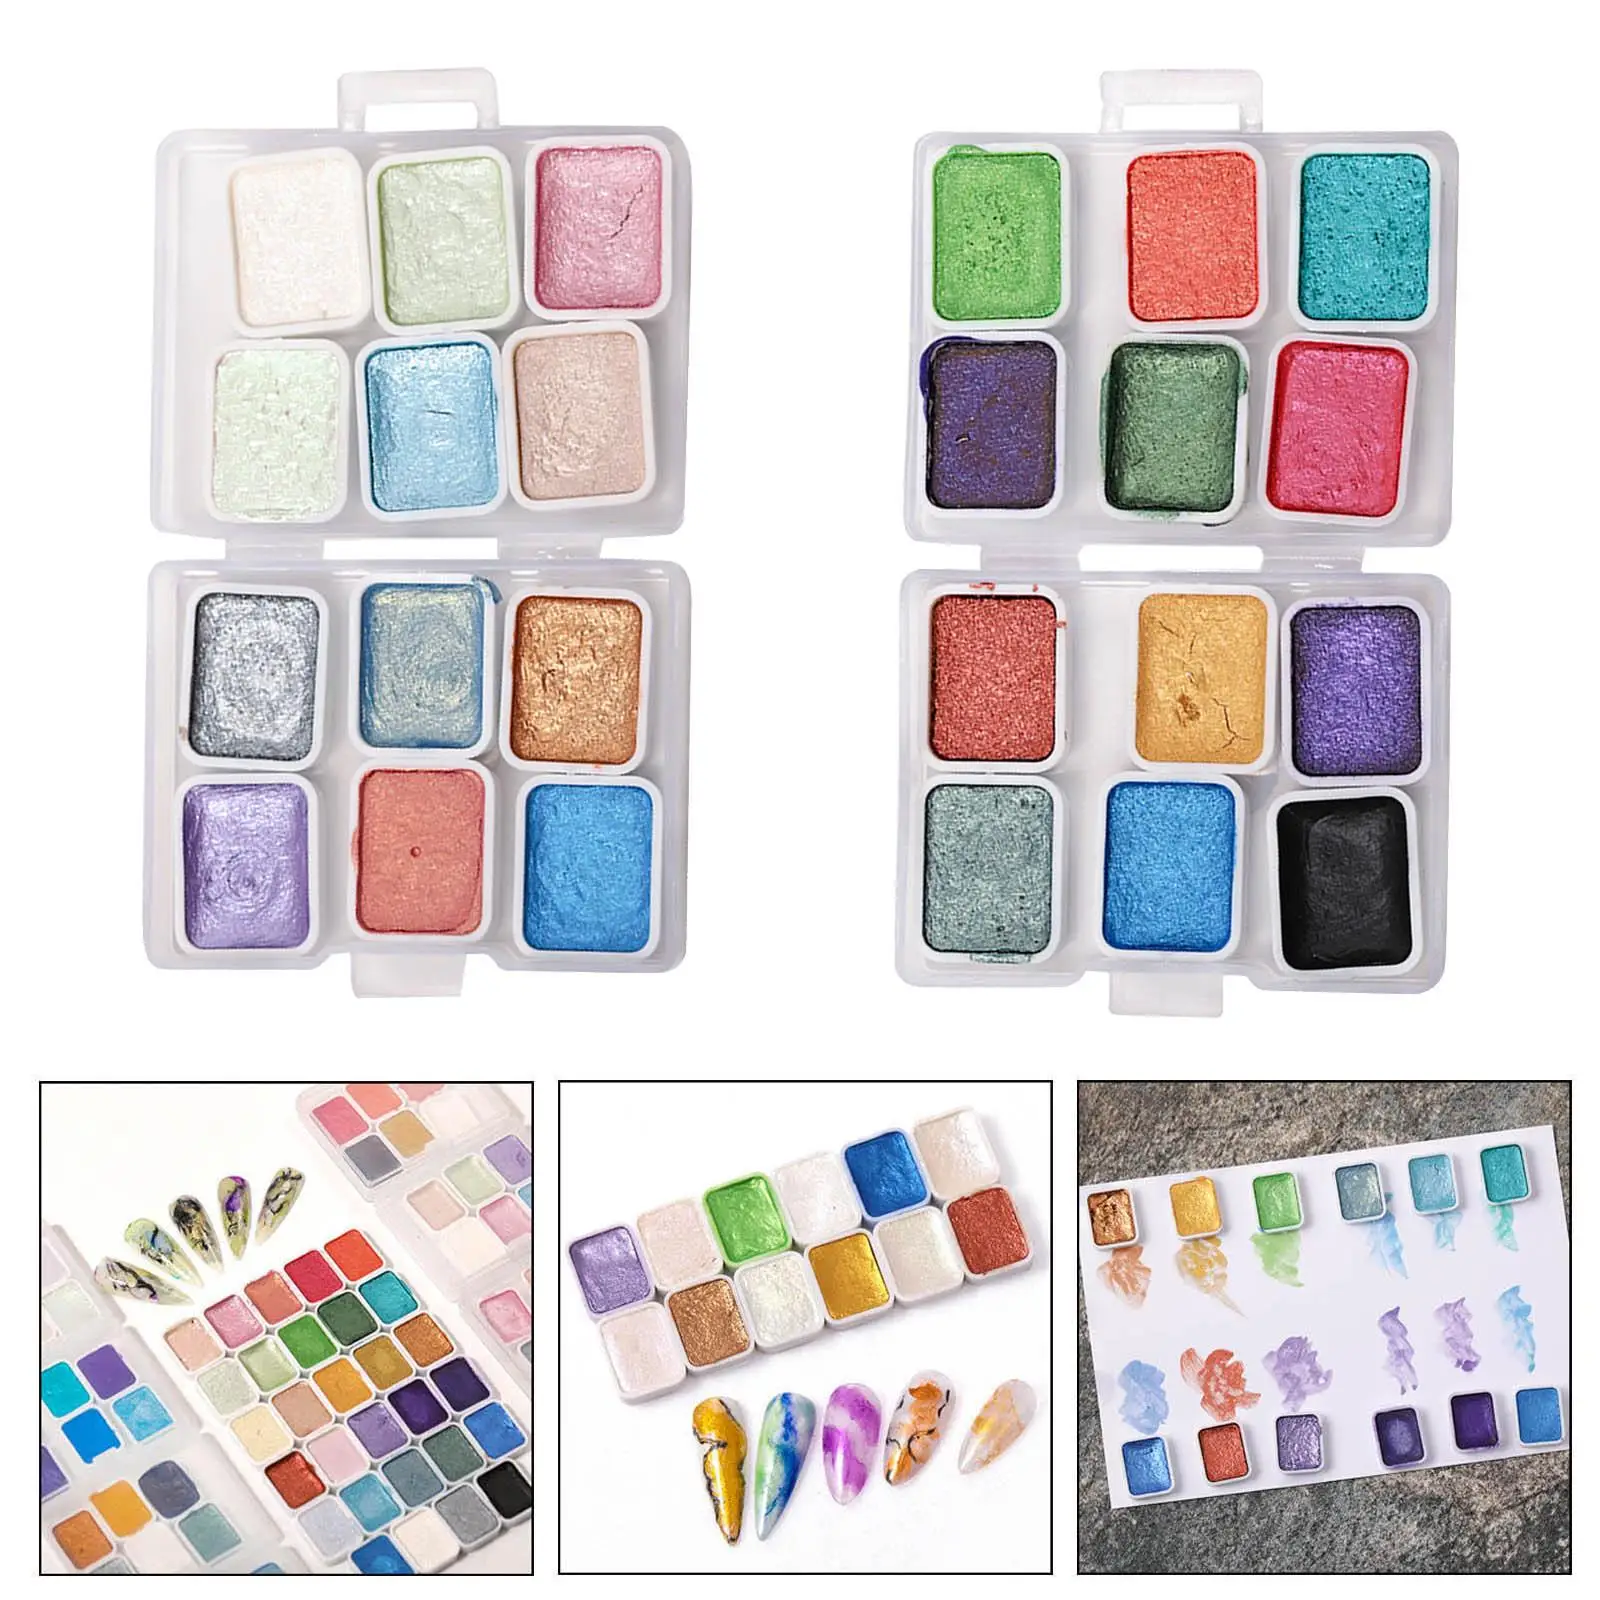 Watercolor Paints Set Professional Solid Palette for Nail Art Decoration Travel Professionals Beginners Students Painters